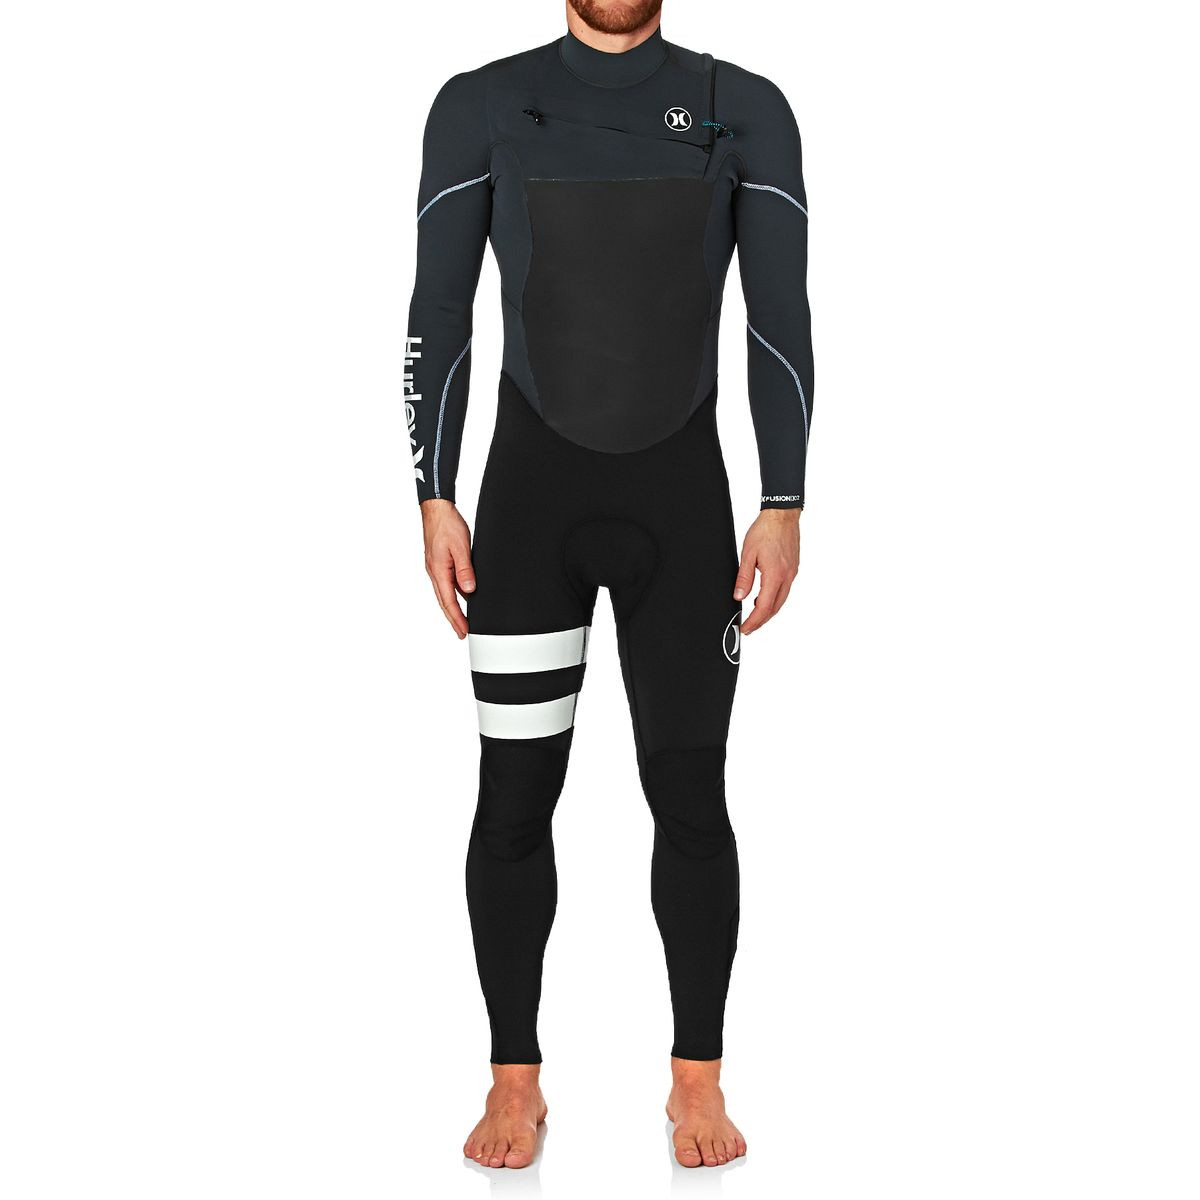 Hurley Fusion 3/2mm 2017 Chest Zip Wetsuit - Anthracite